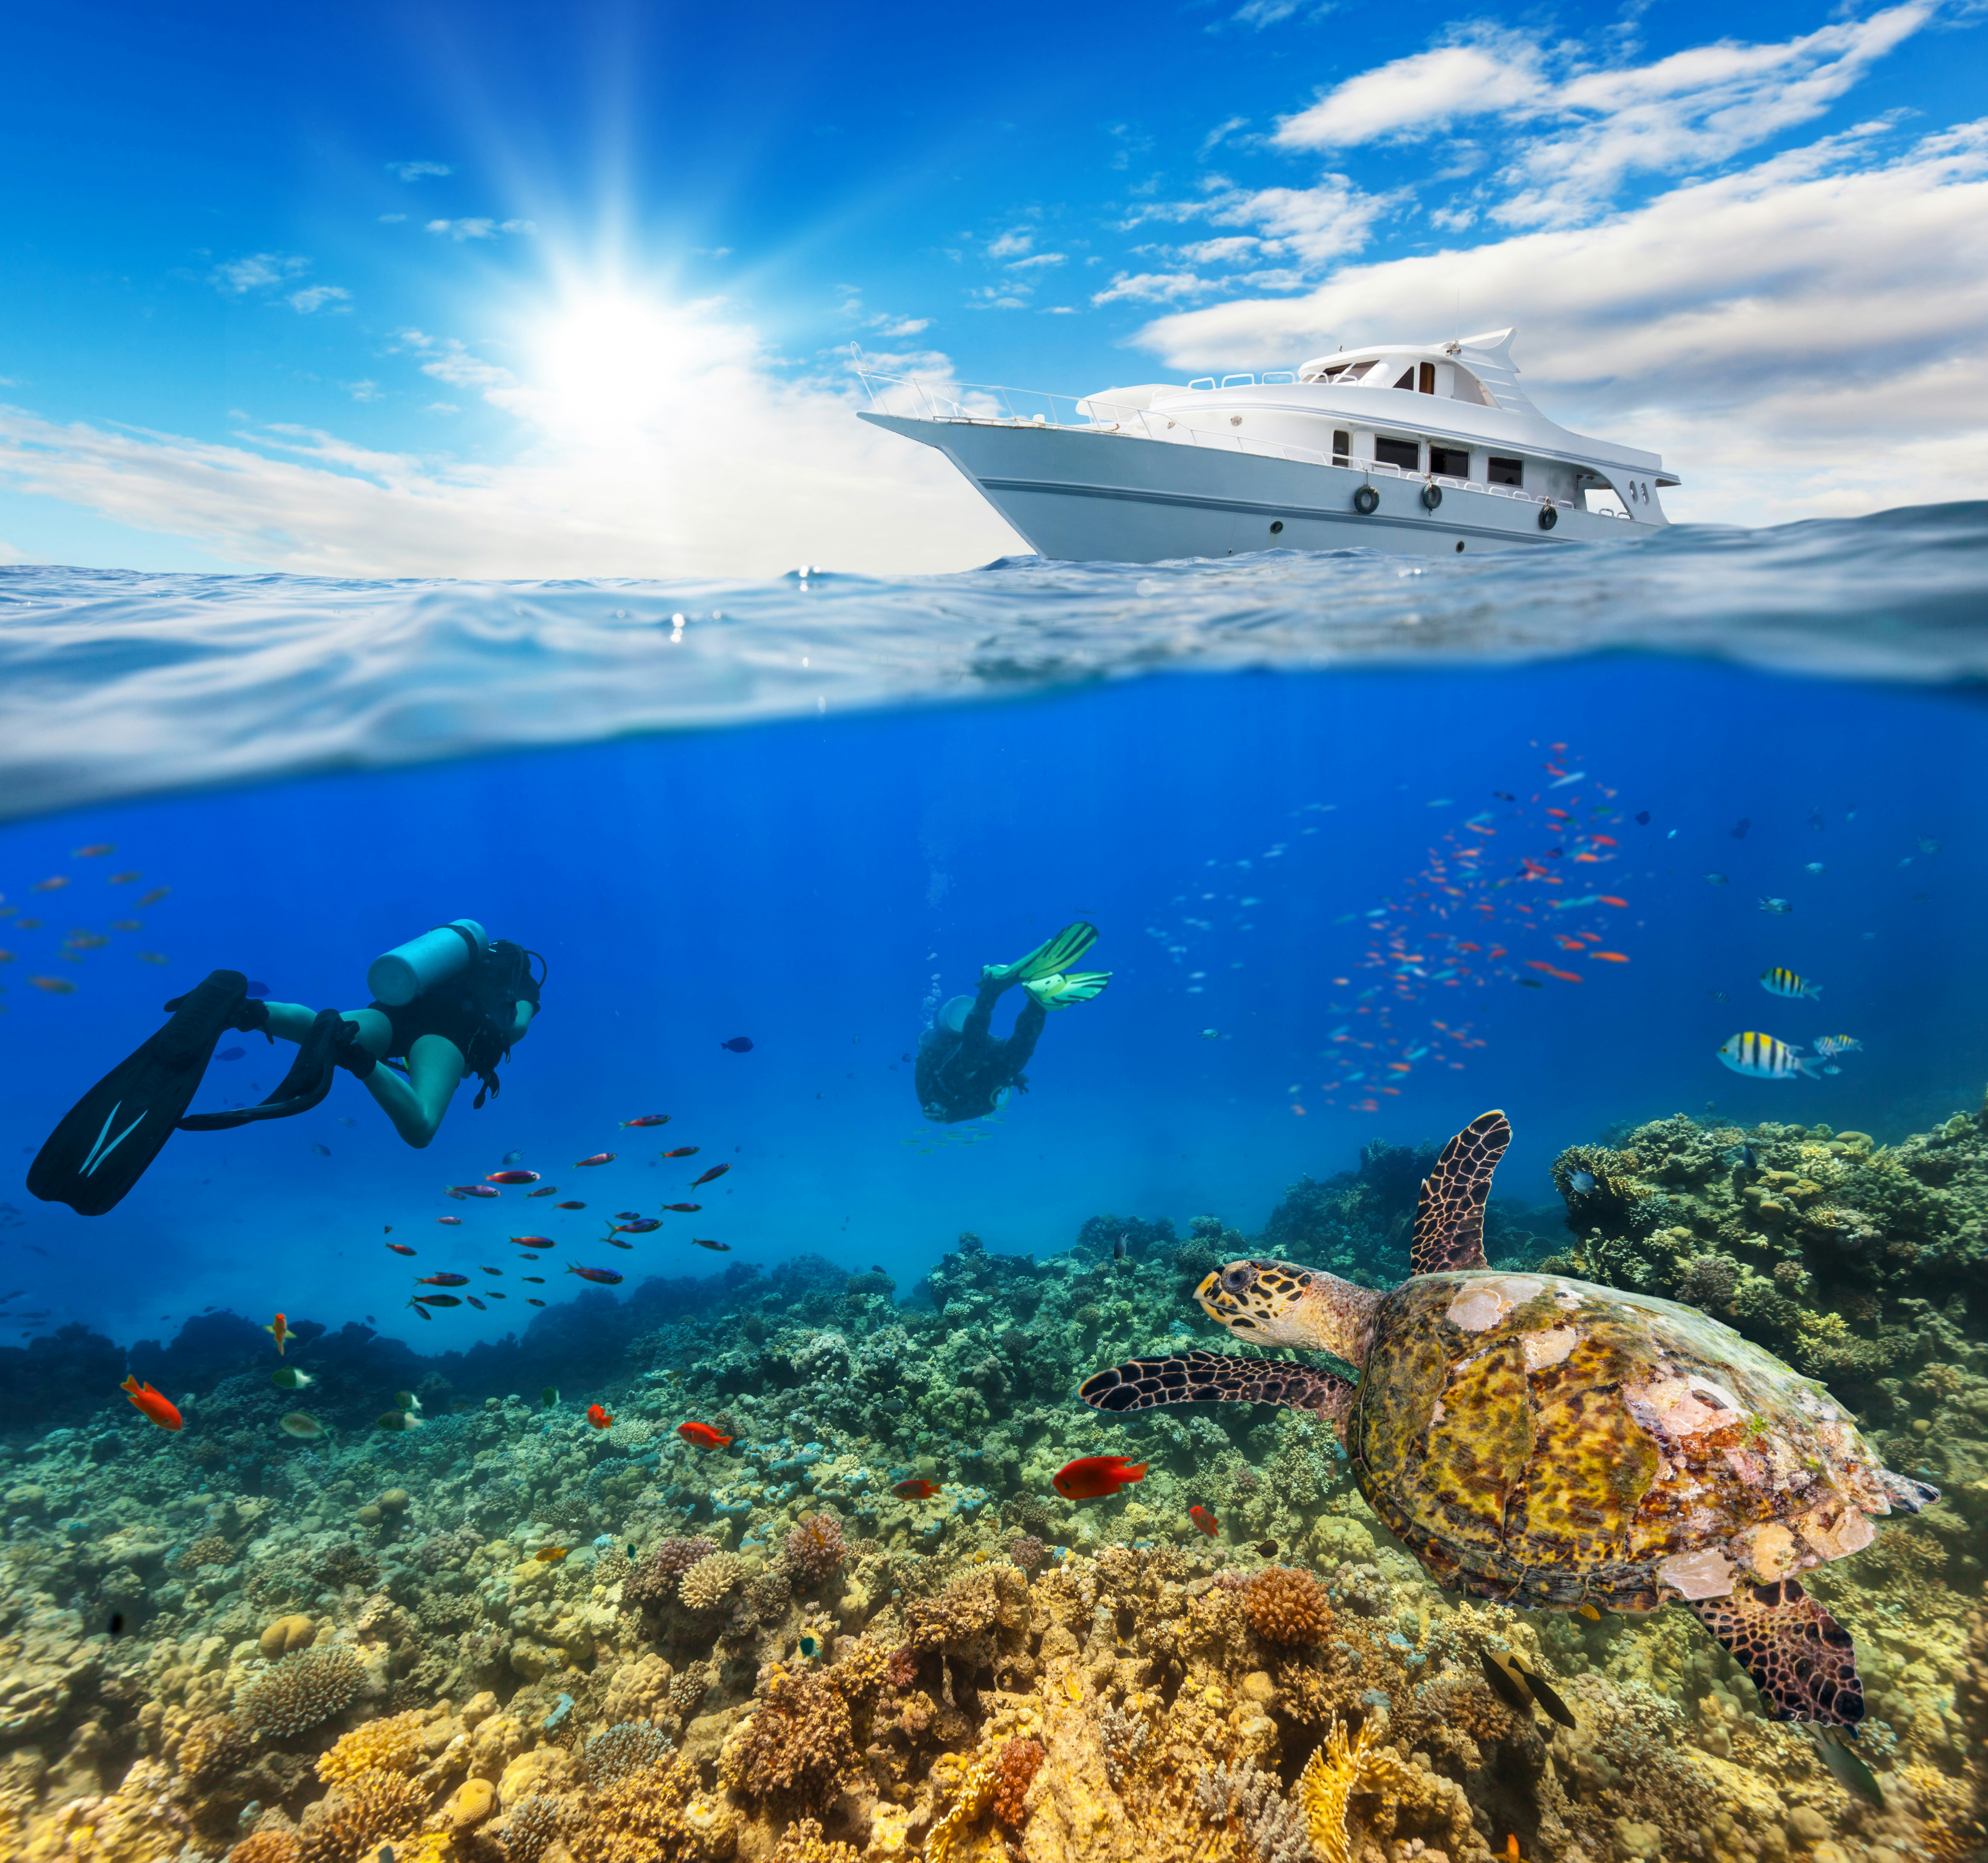 Getting to know the underwater world while sailing will reveal a whole new world to you